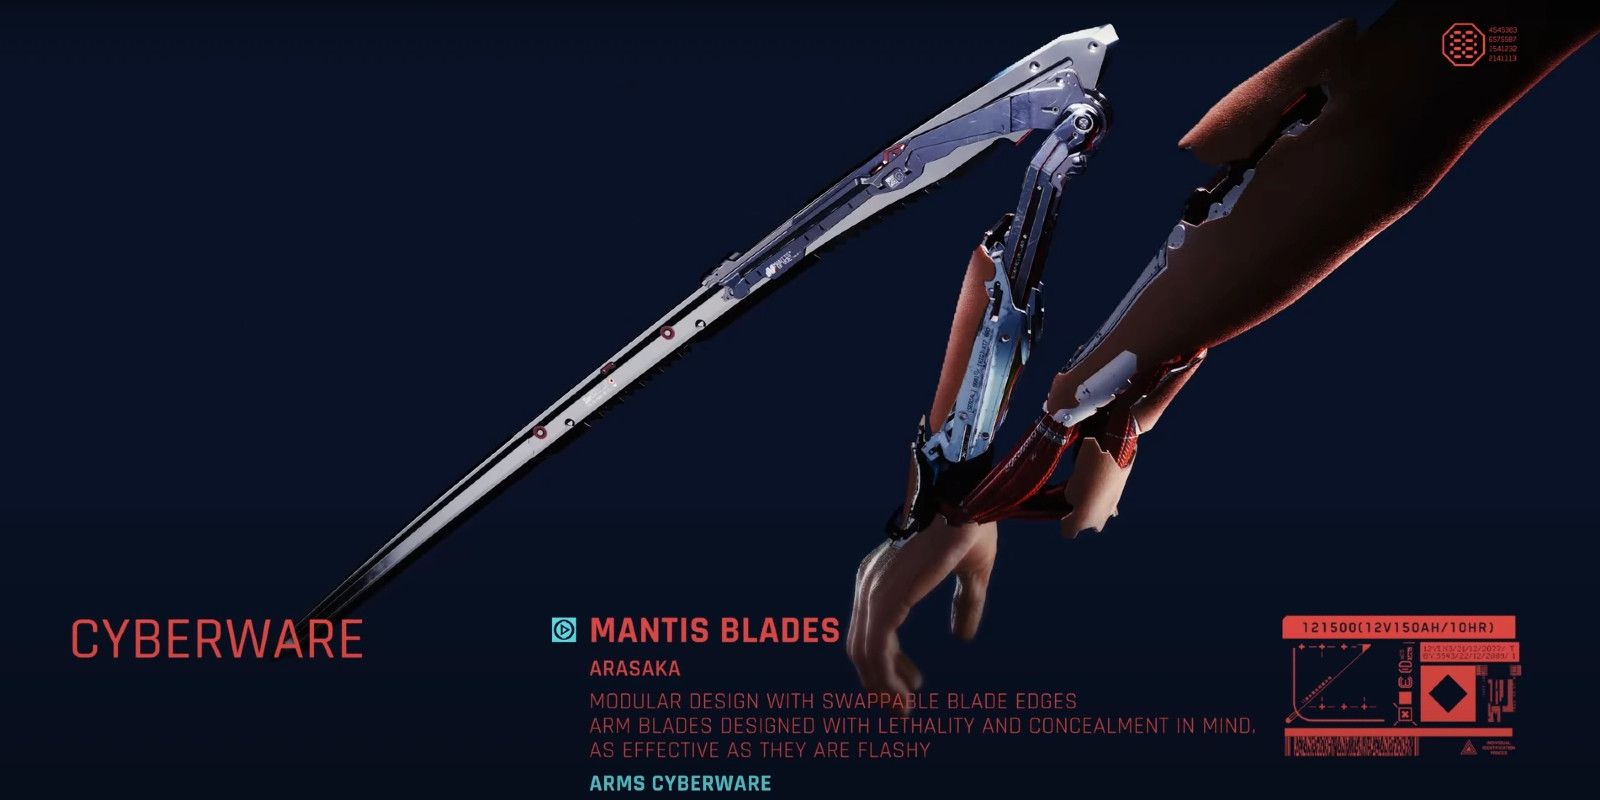 Informative screen for the Mantis Blades cyberware in Cyberpunk 2077. Manufactured by Arasaka, the Mantis Blades description reads, "Modular design with swappable blade edges. Arm blades designed with lethality and concealment in mind. As effective as they are flashy."